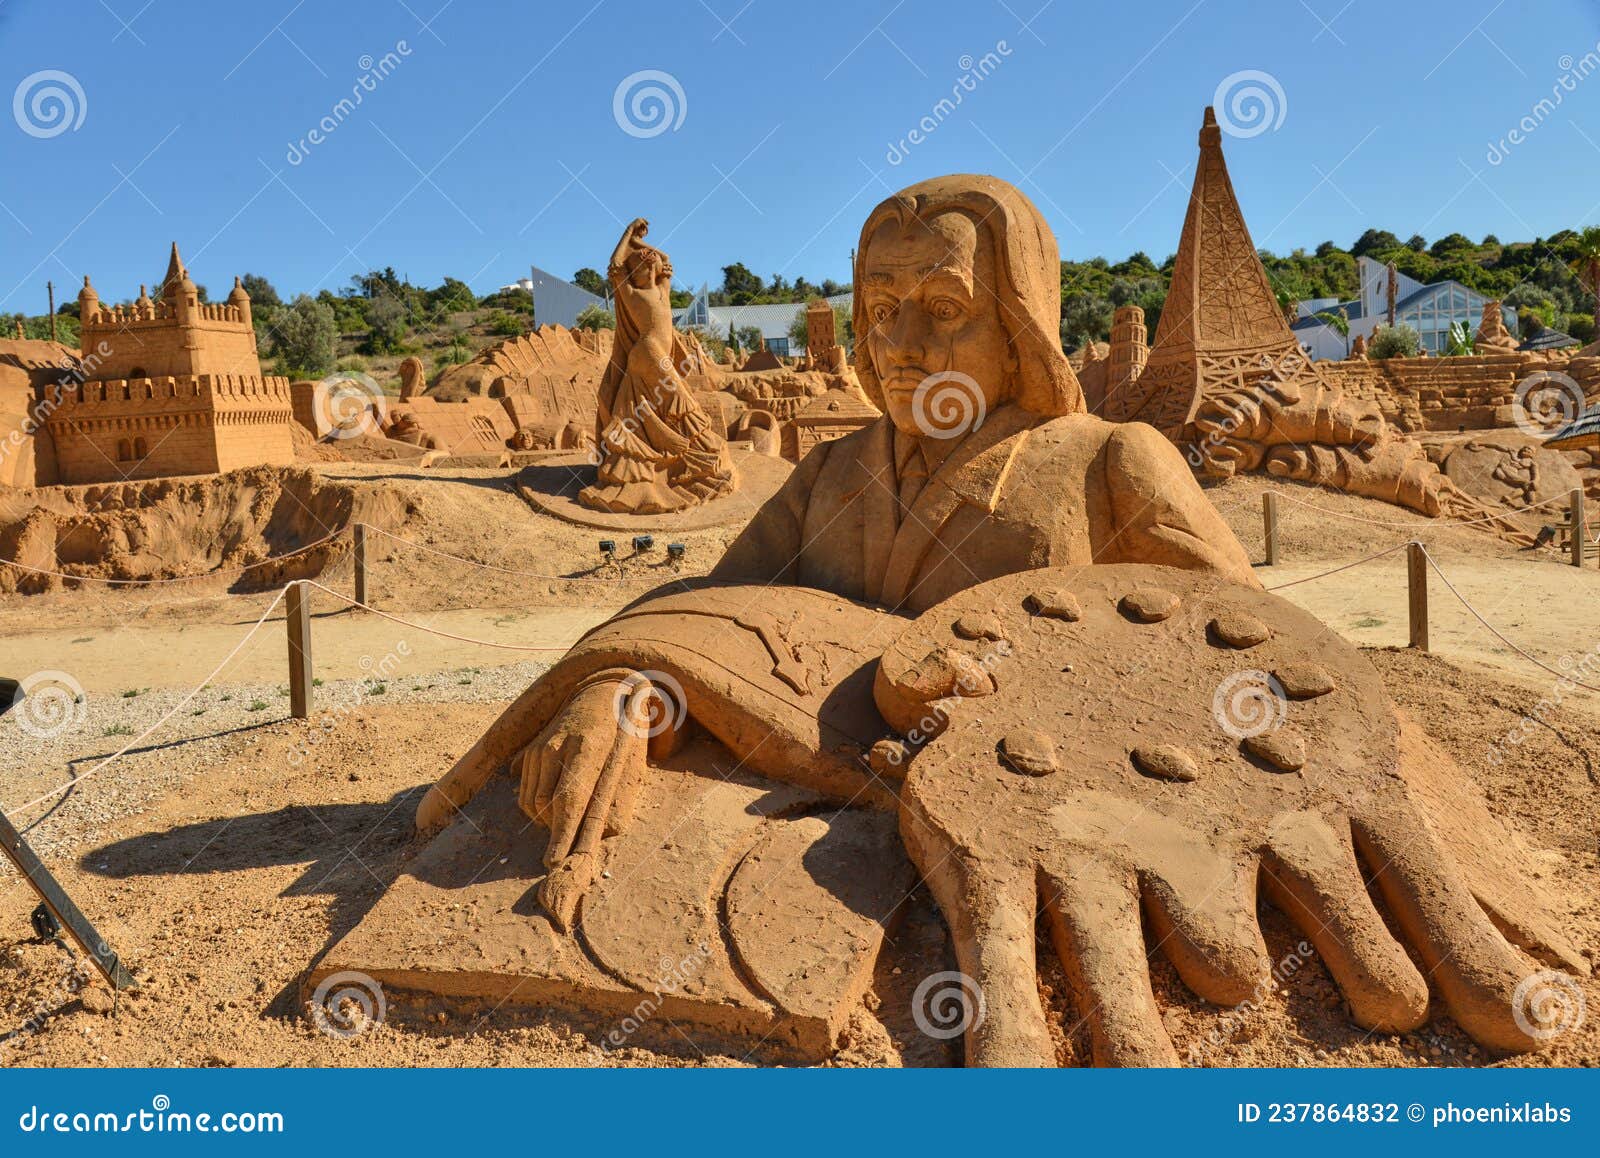 The Sculptures of Sand City in Lagoa, Portugal Editorial Photography ...